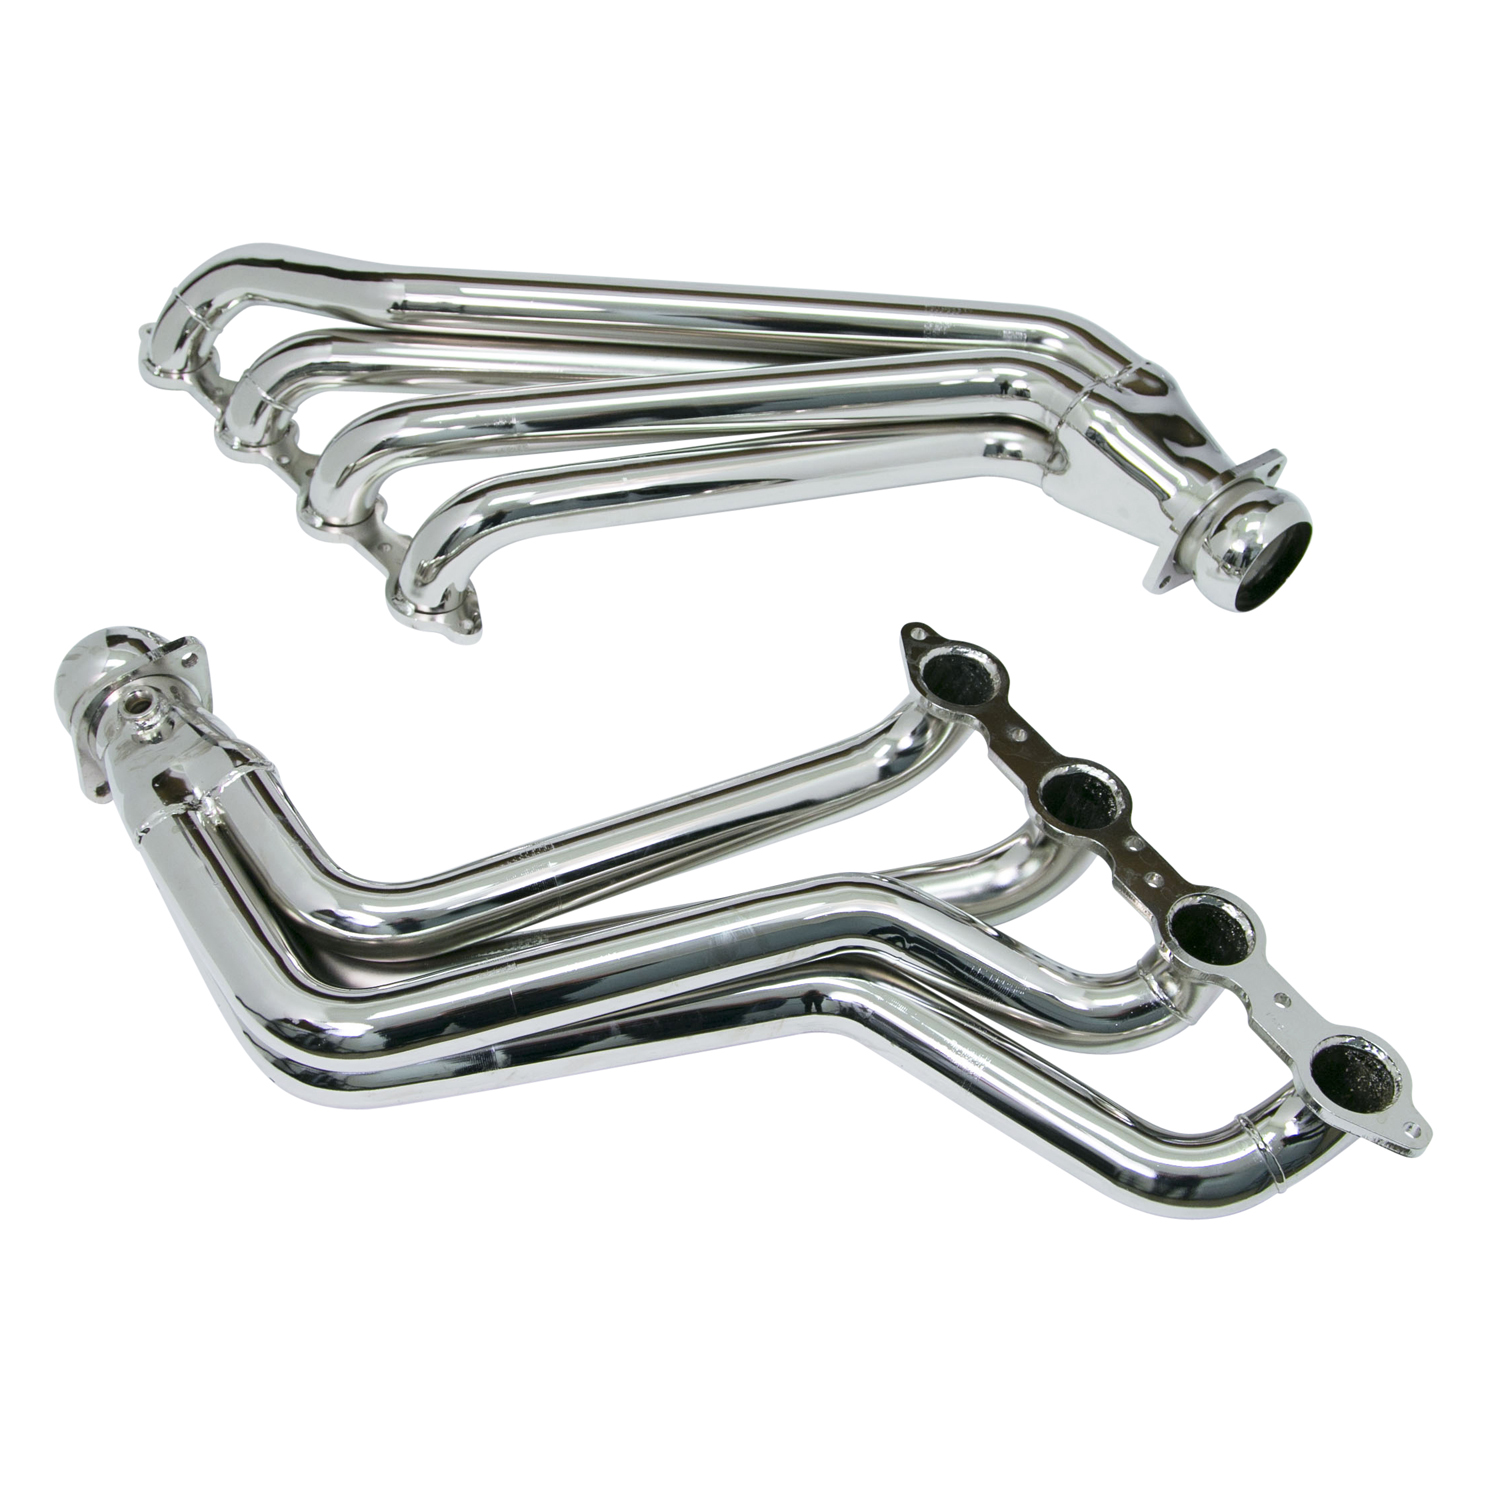 Picture of BBK 4021 Camaro Ls3/l99 1-3/4 Long Tube Headers W/cats System (chrome)